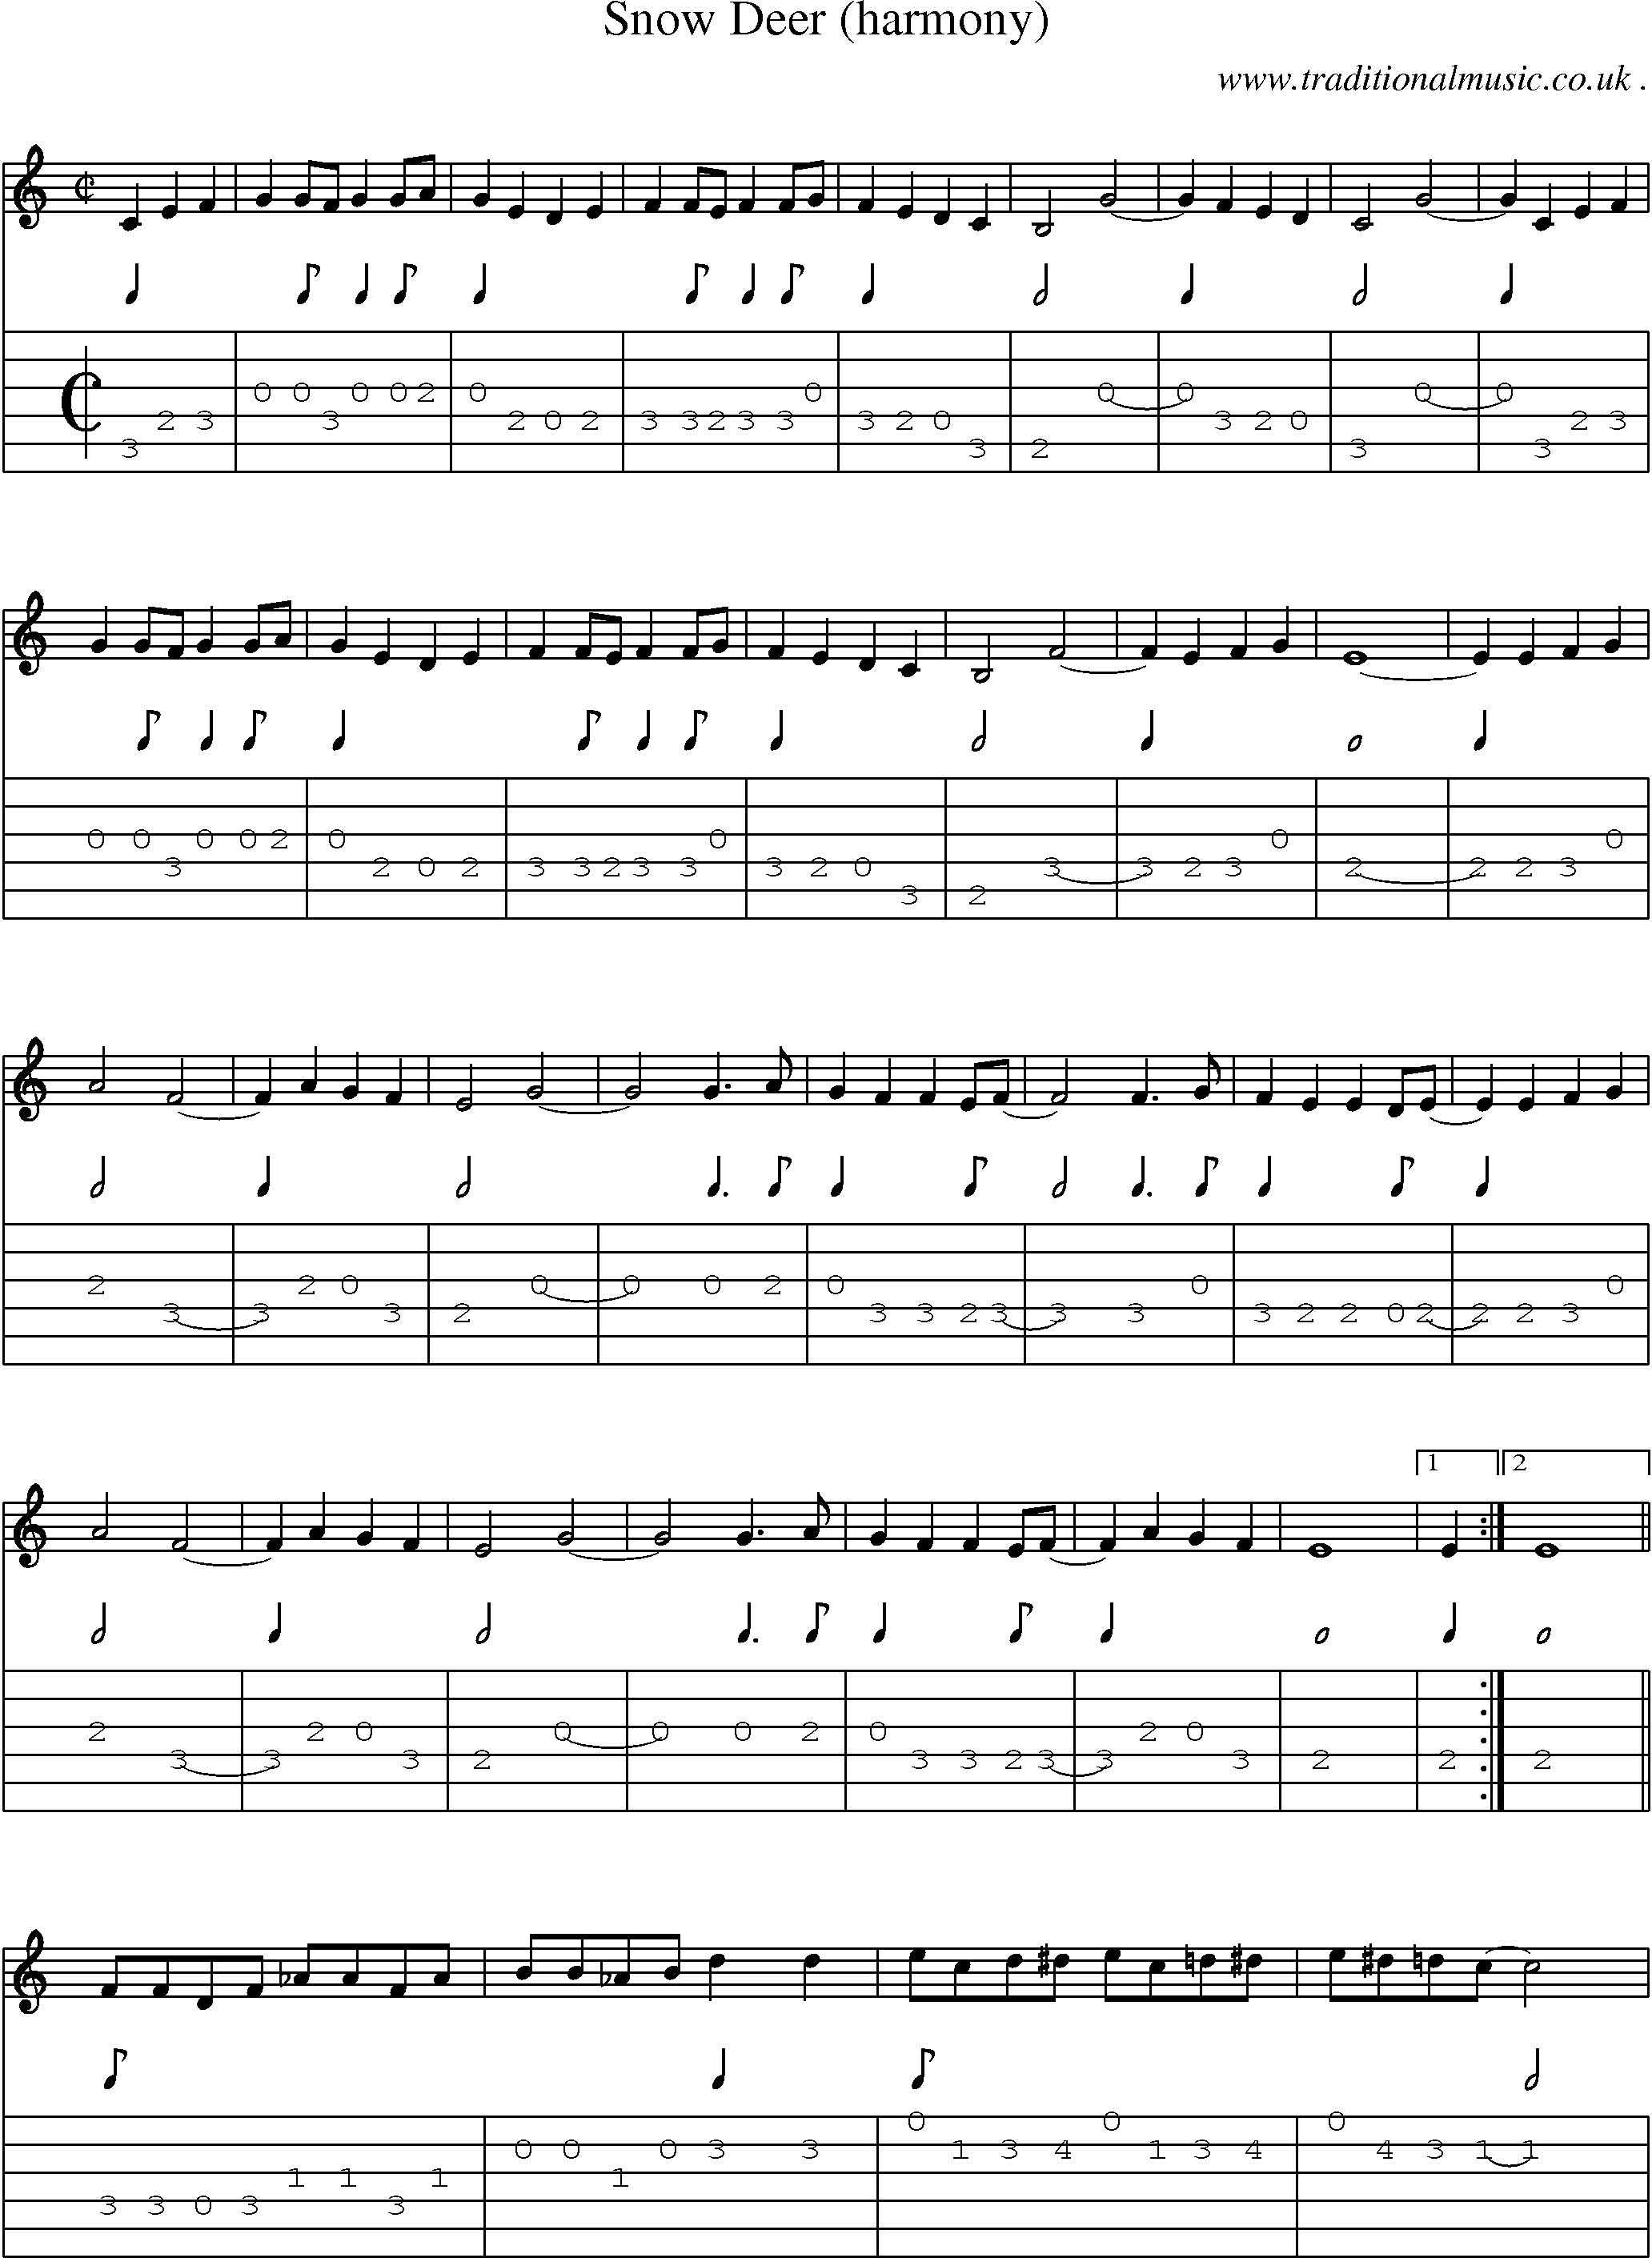 Music Score and Guitar Tabs for Snow Deer (harmony)